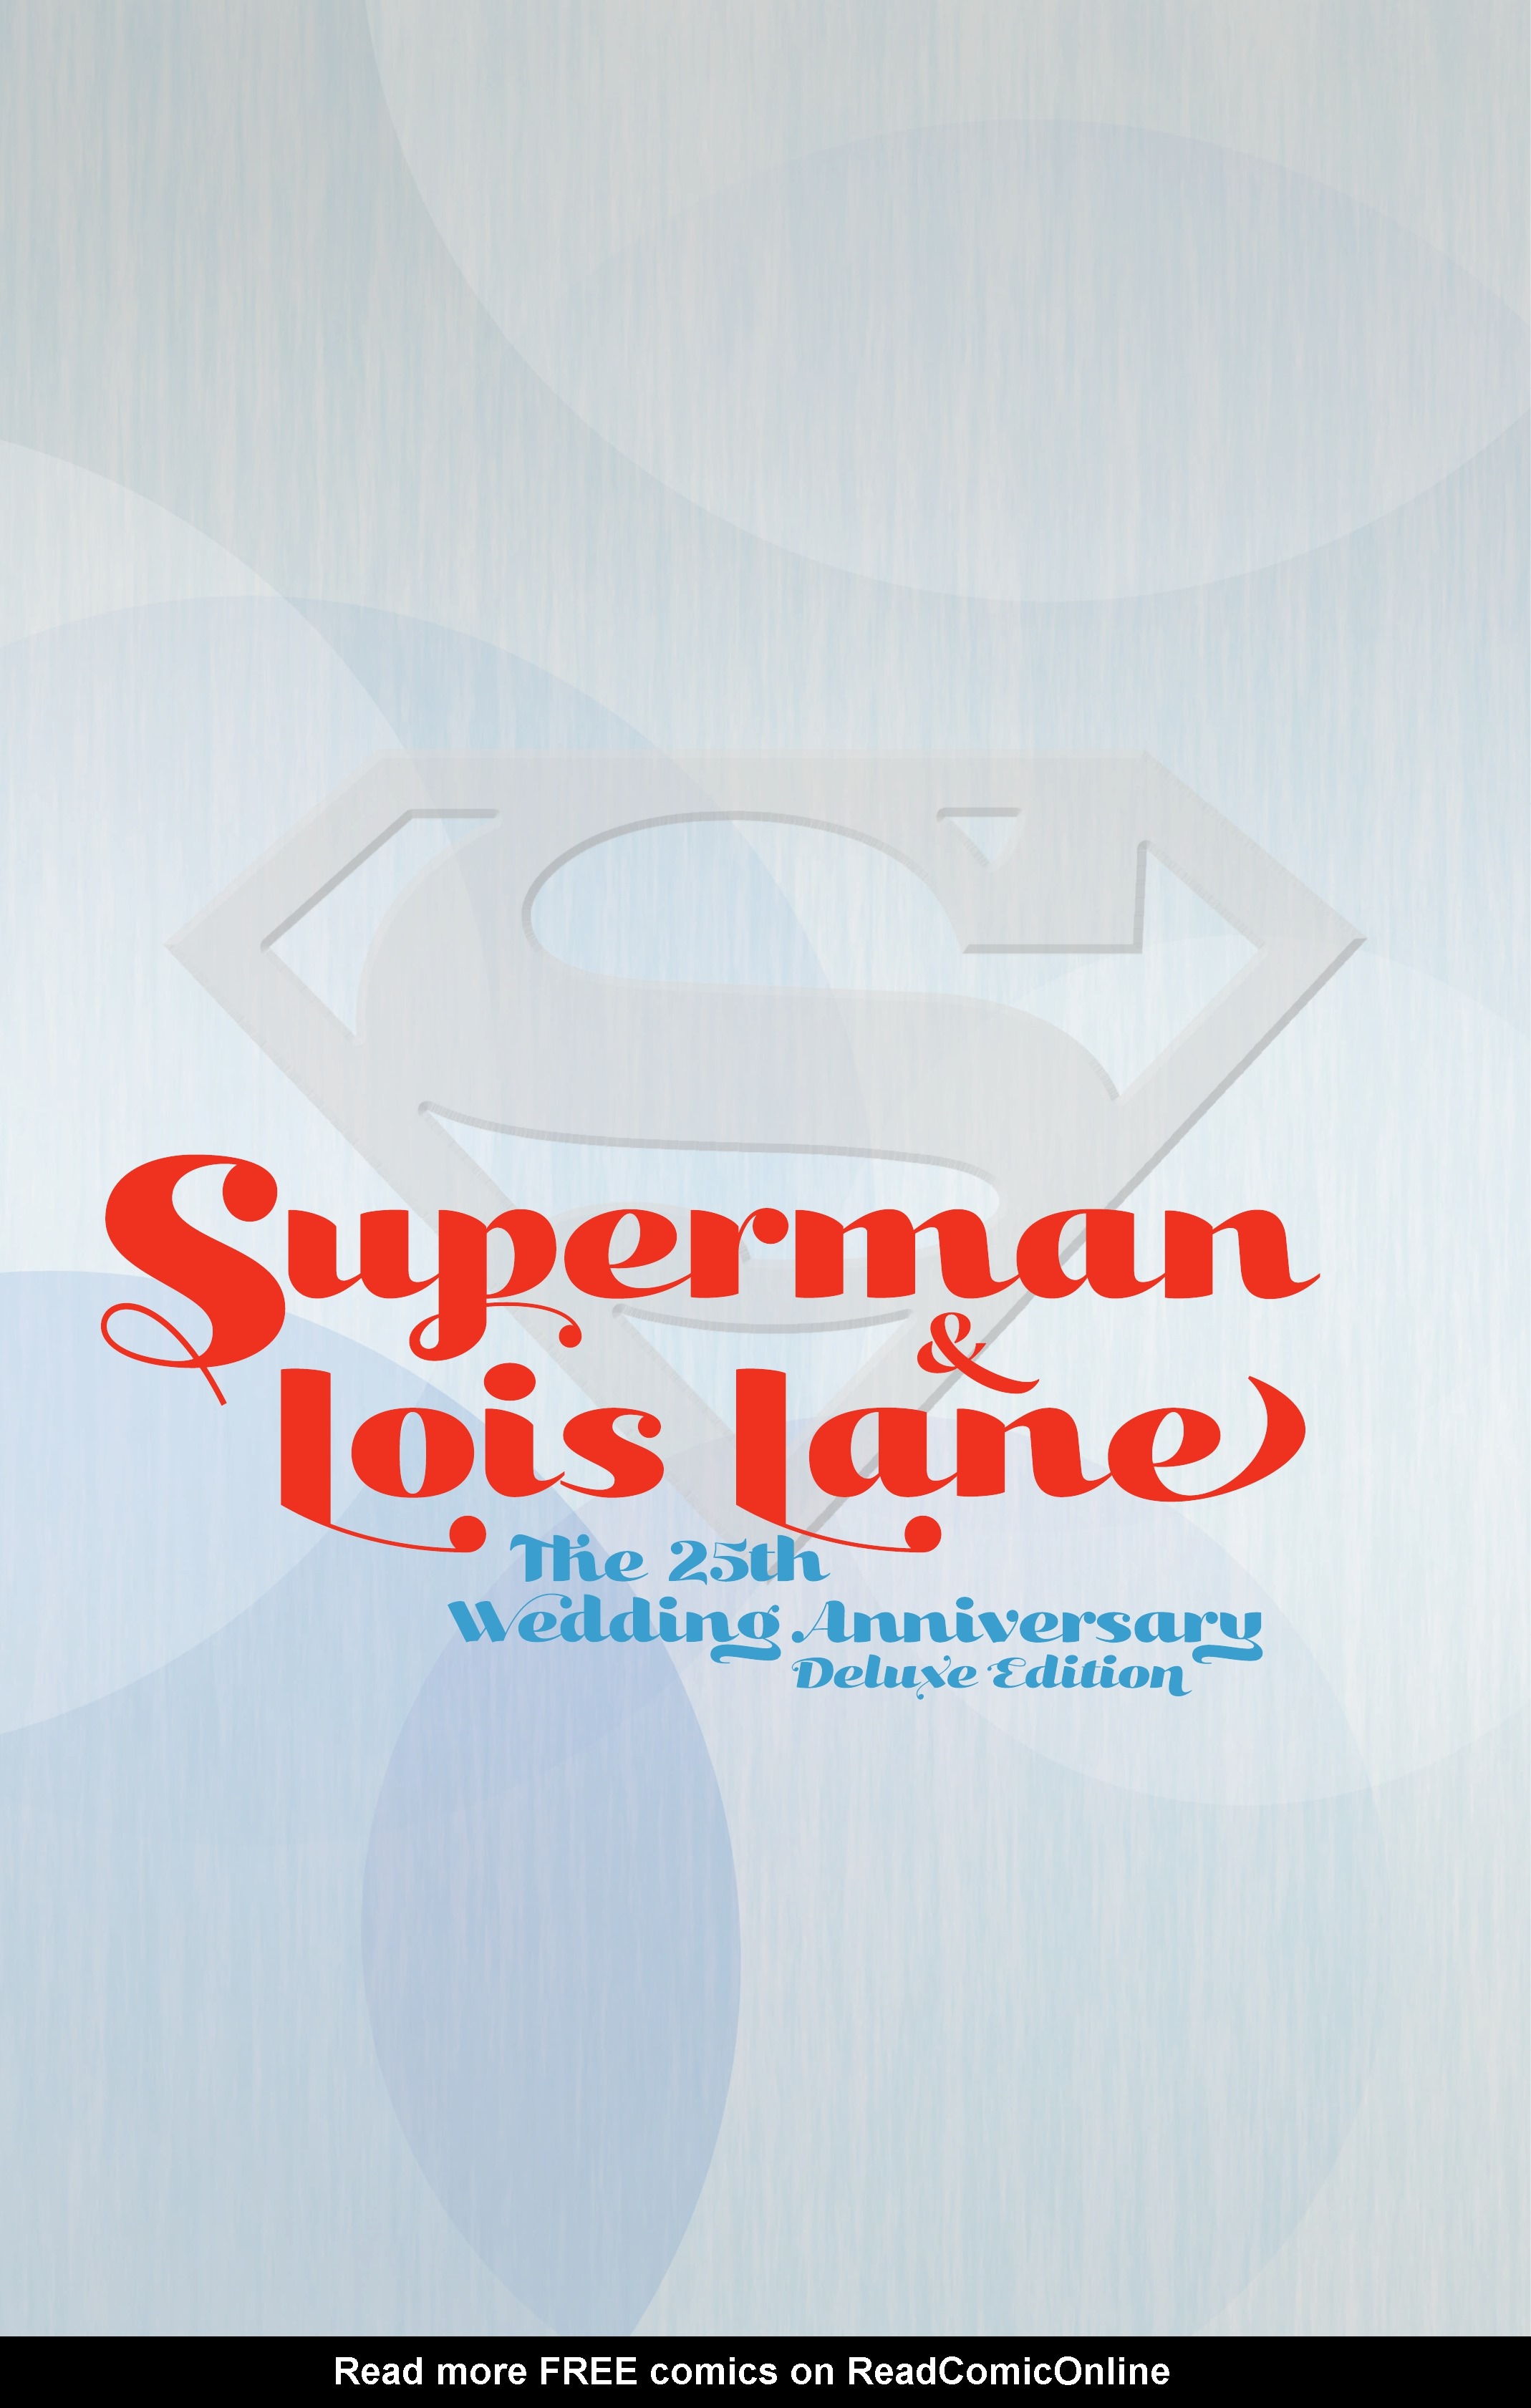 Read online Superman & Lois Lane: The 25th Wedding Anniversary Deluxe Edition comic -  Issue # TPB (Part 1) - 2